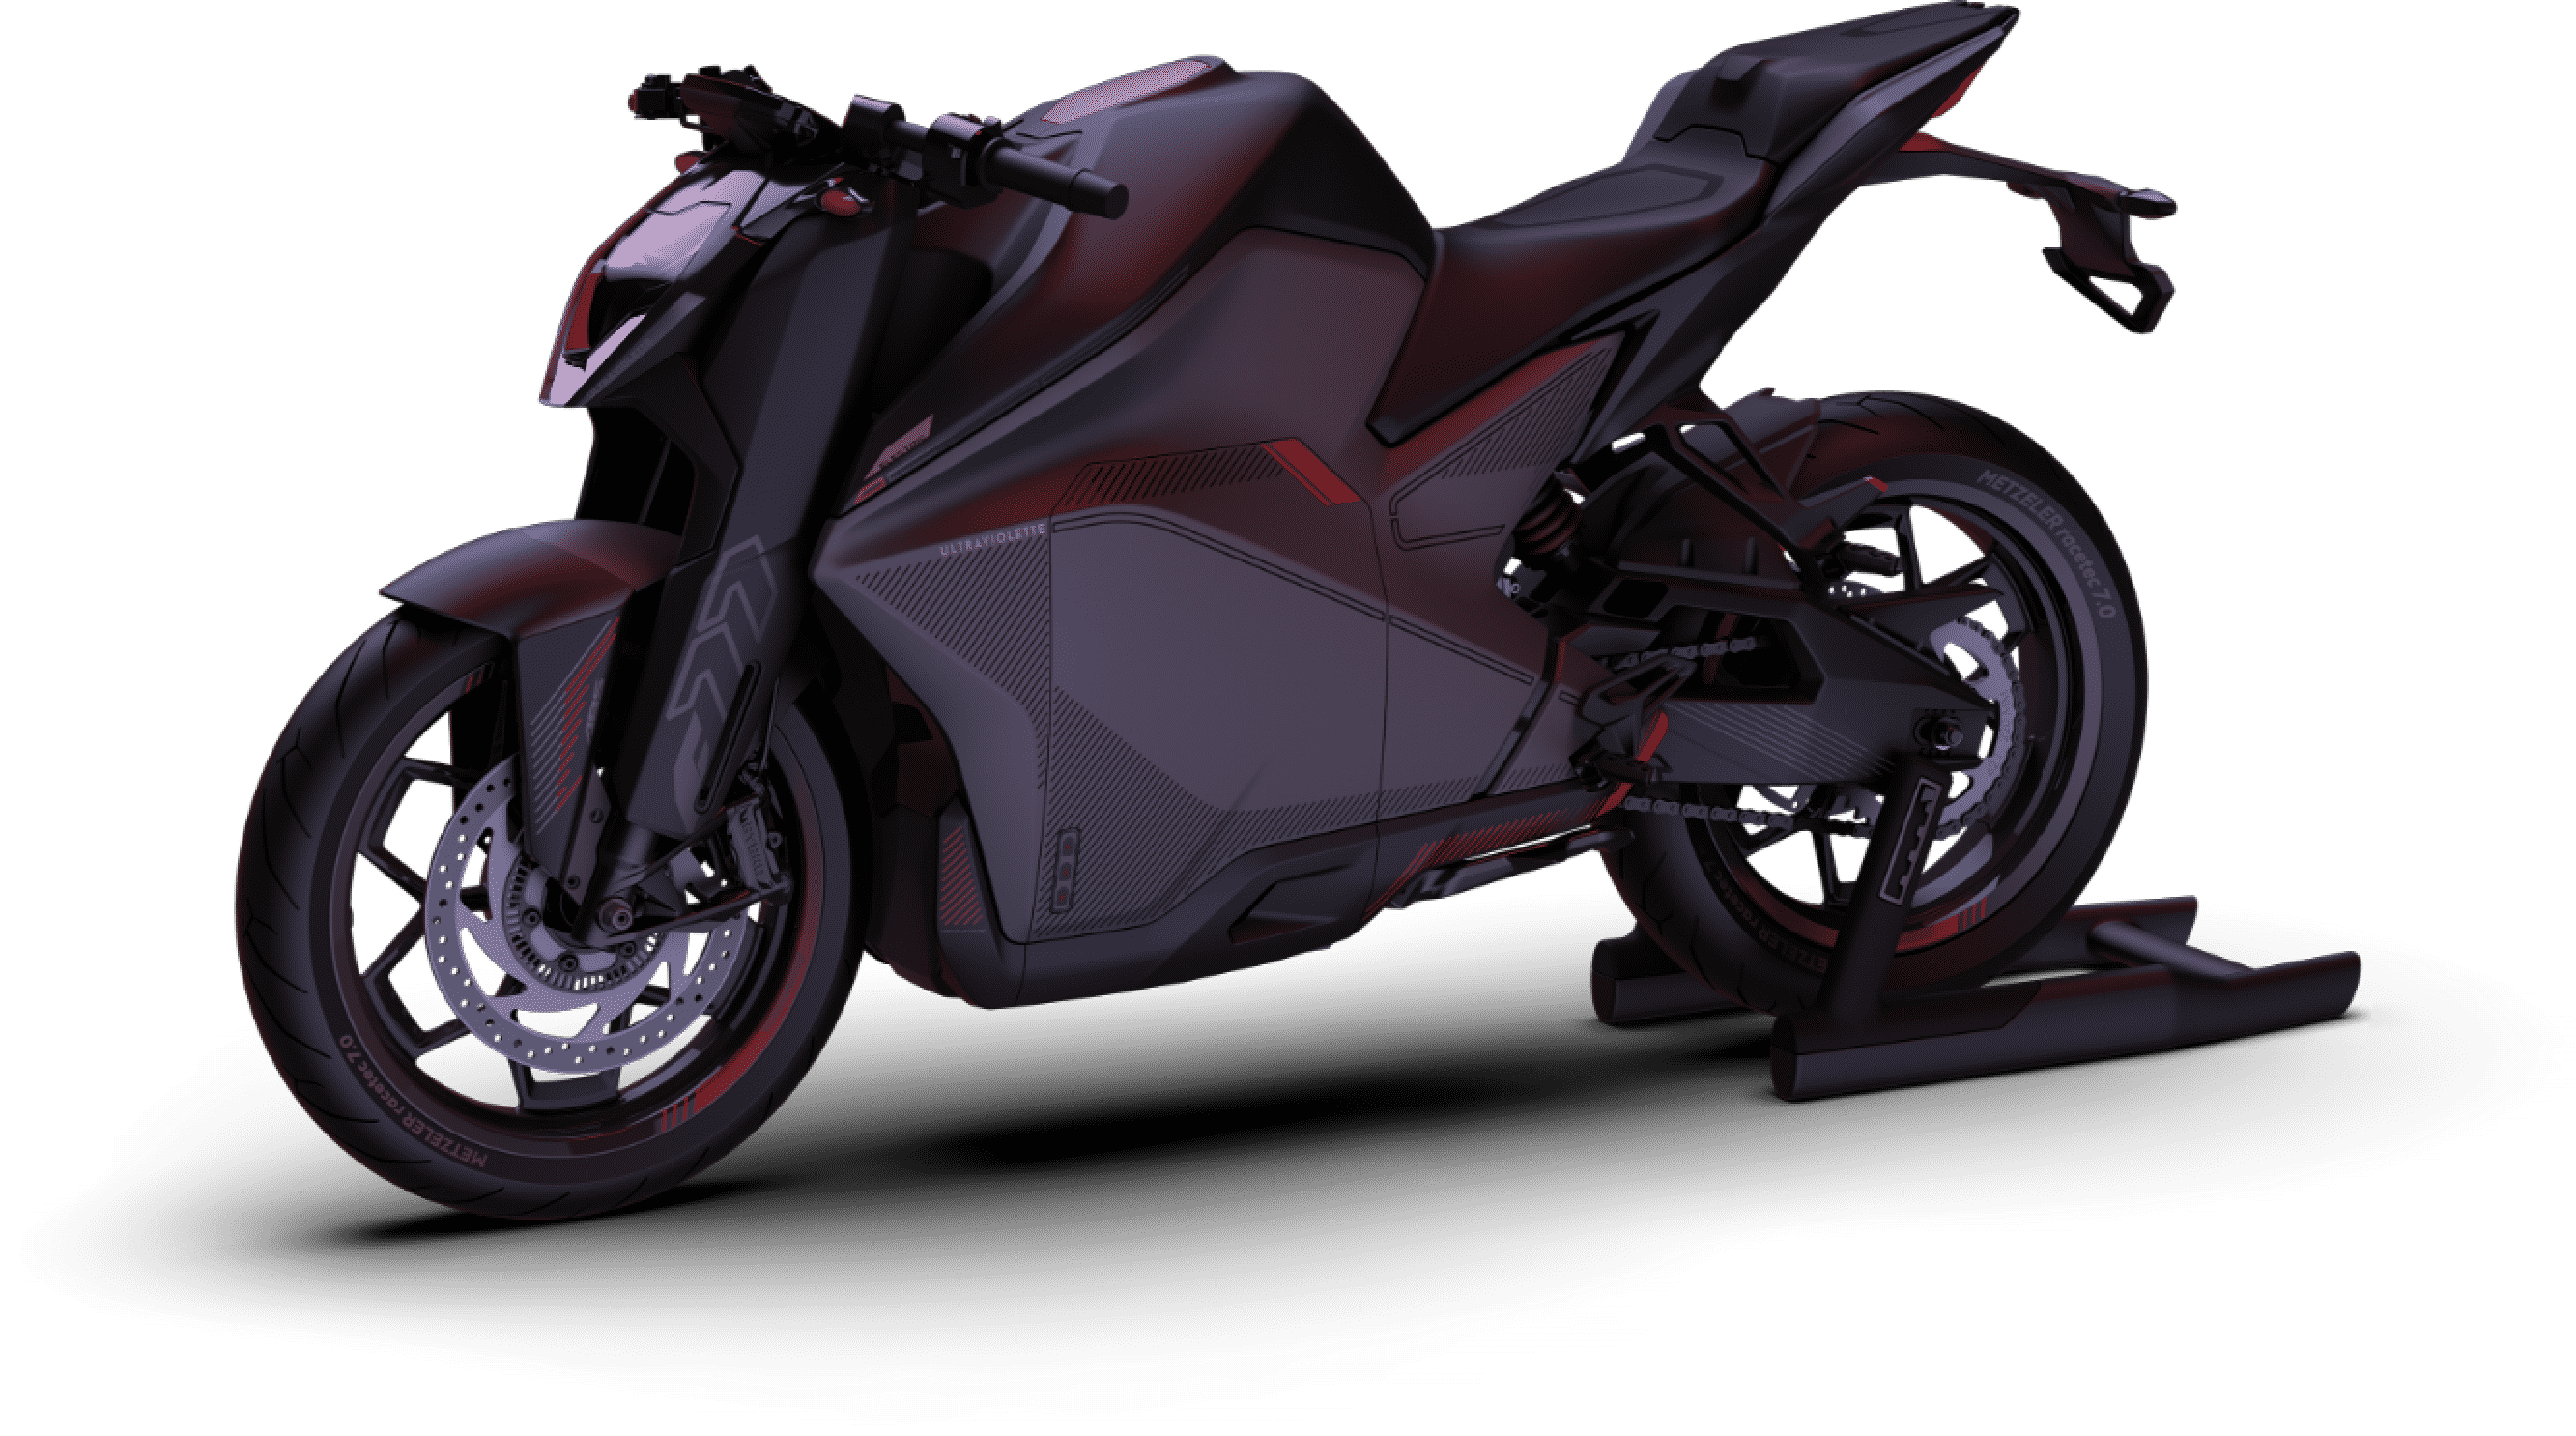 TVS Motor Company invests Rs 30 cr in electric vehicle start-up Ultraviolette Automotive